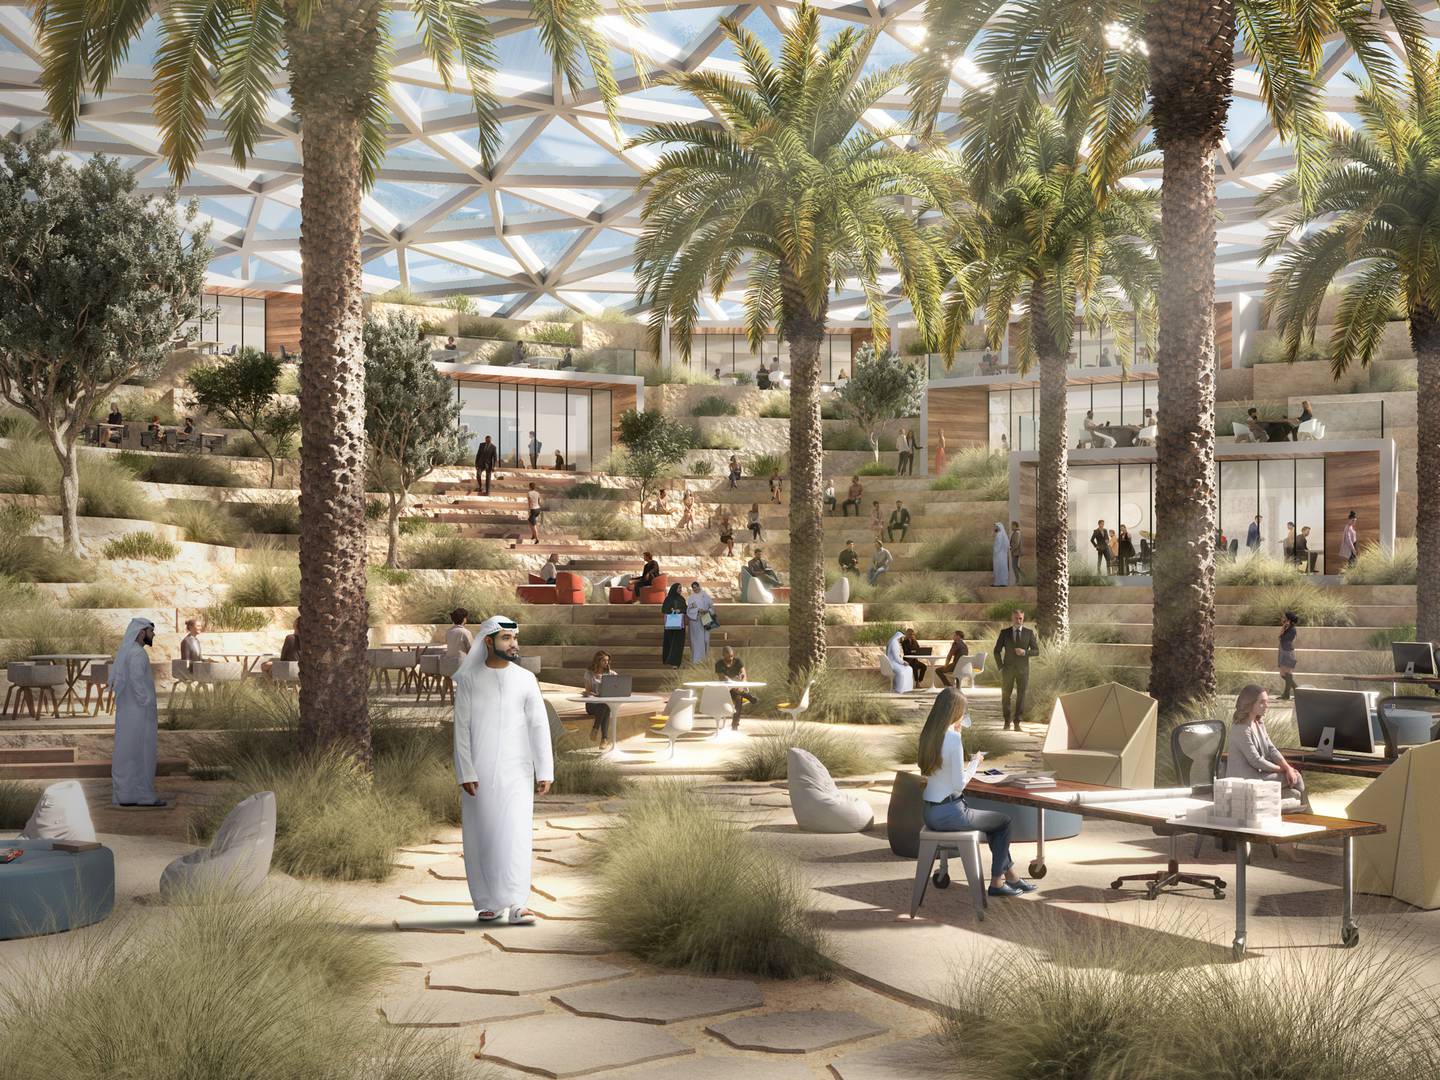 Dubai Agri Hub will feature a nature and heritage conservation centre. Photo: URB